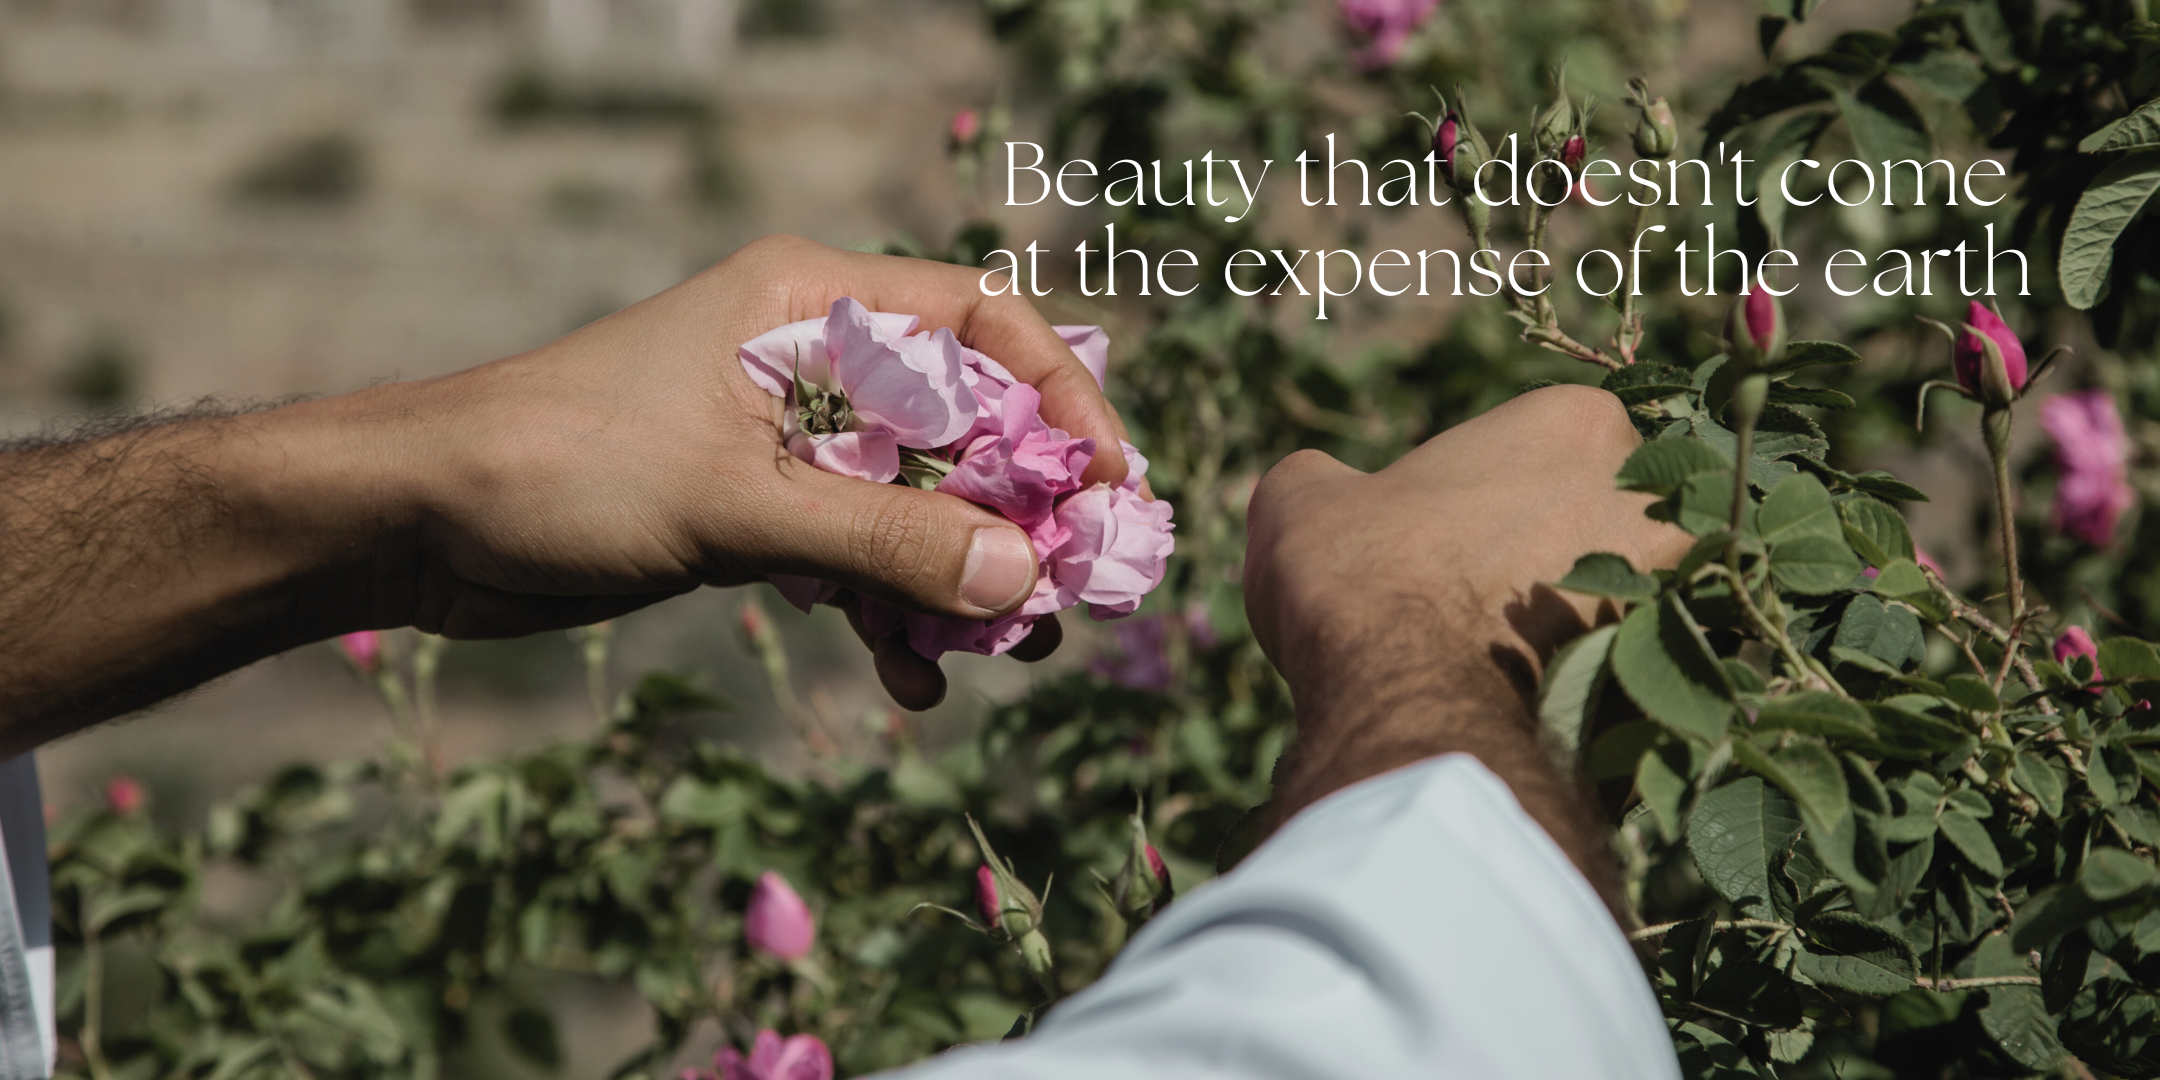 Beauty that does not come at the expense of the earth. Image: Man picking damask roses at plantation